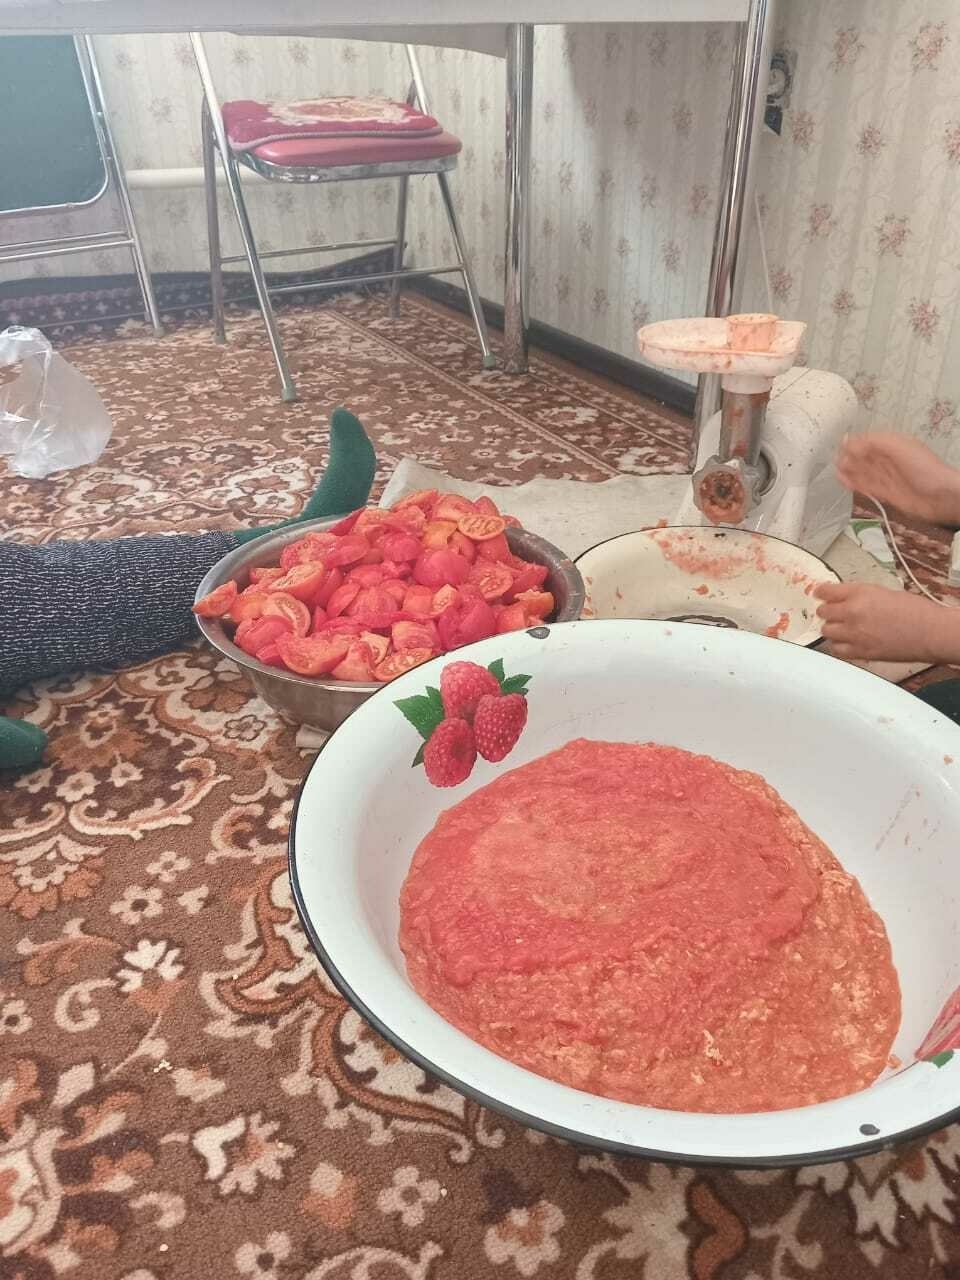 bowl of tomato sauce, second bowl of sliced tomatoes next to an ingredient mincing machine